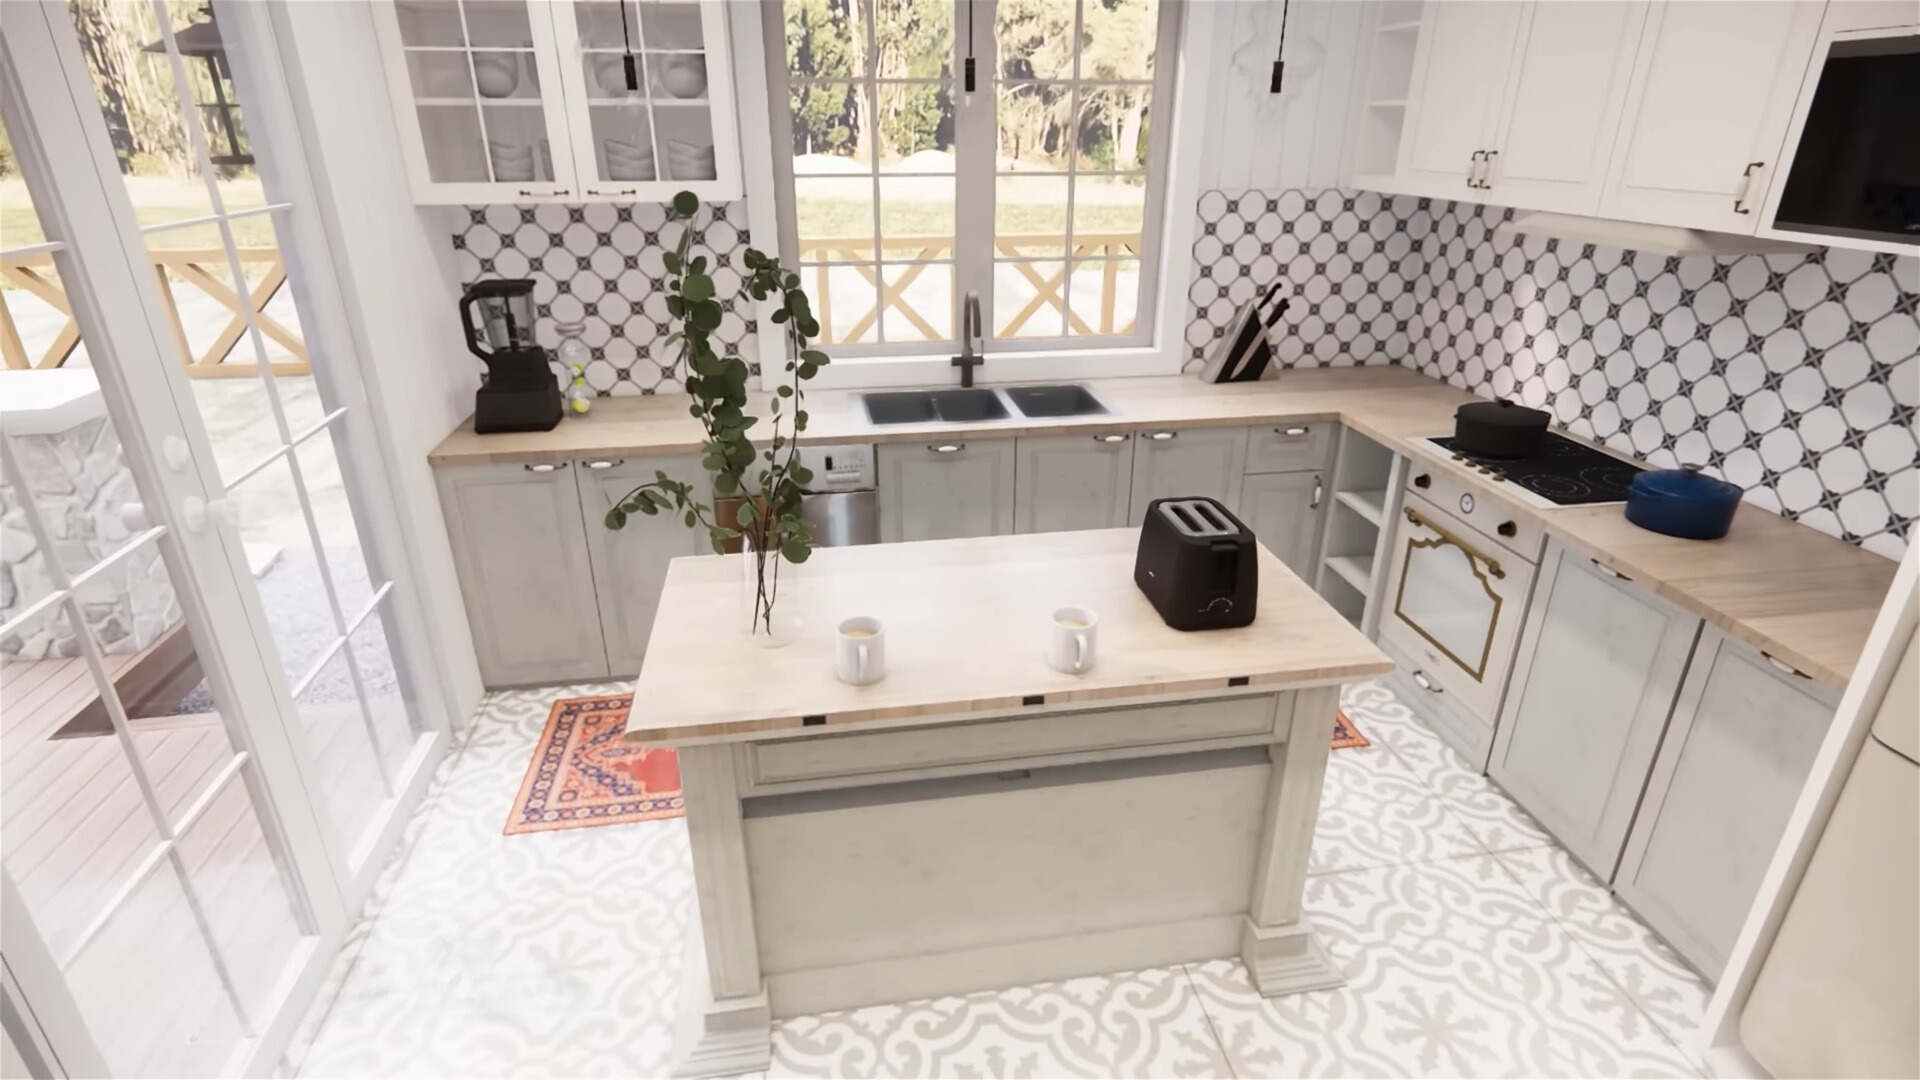 minimalist kitchen, white cabinets on top and light grey cabinets and island on the bottom, wooden countertop, patterned tiles between the cabinets